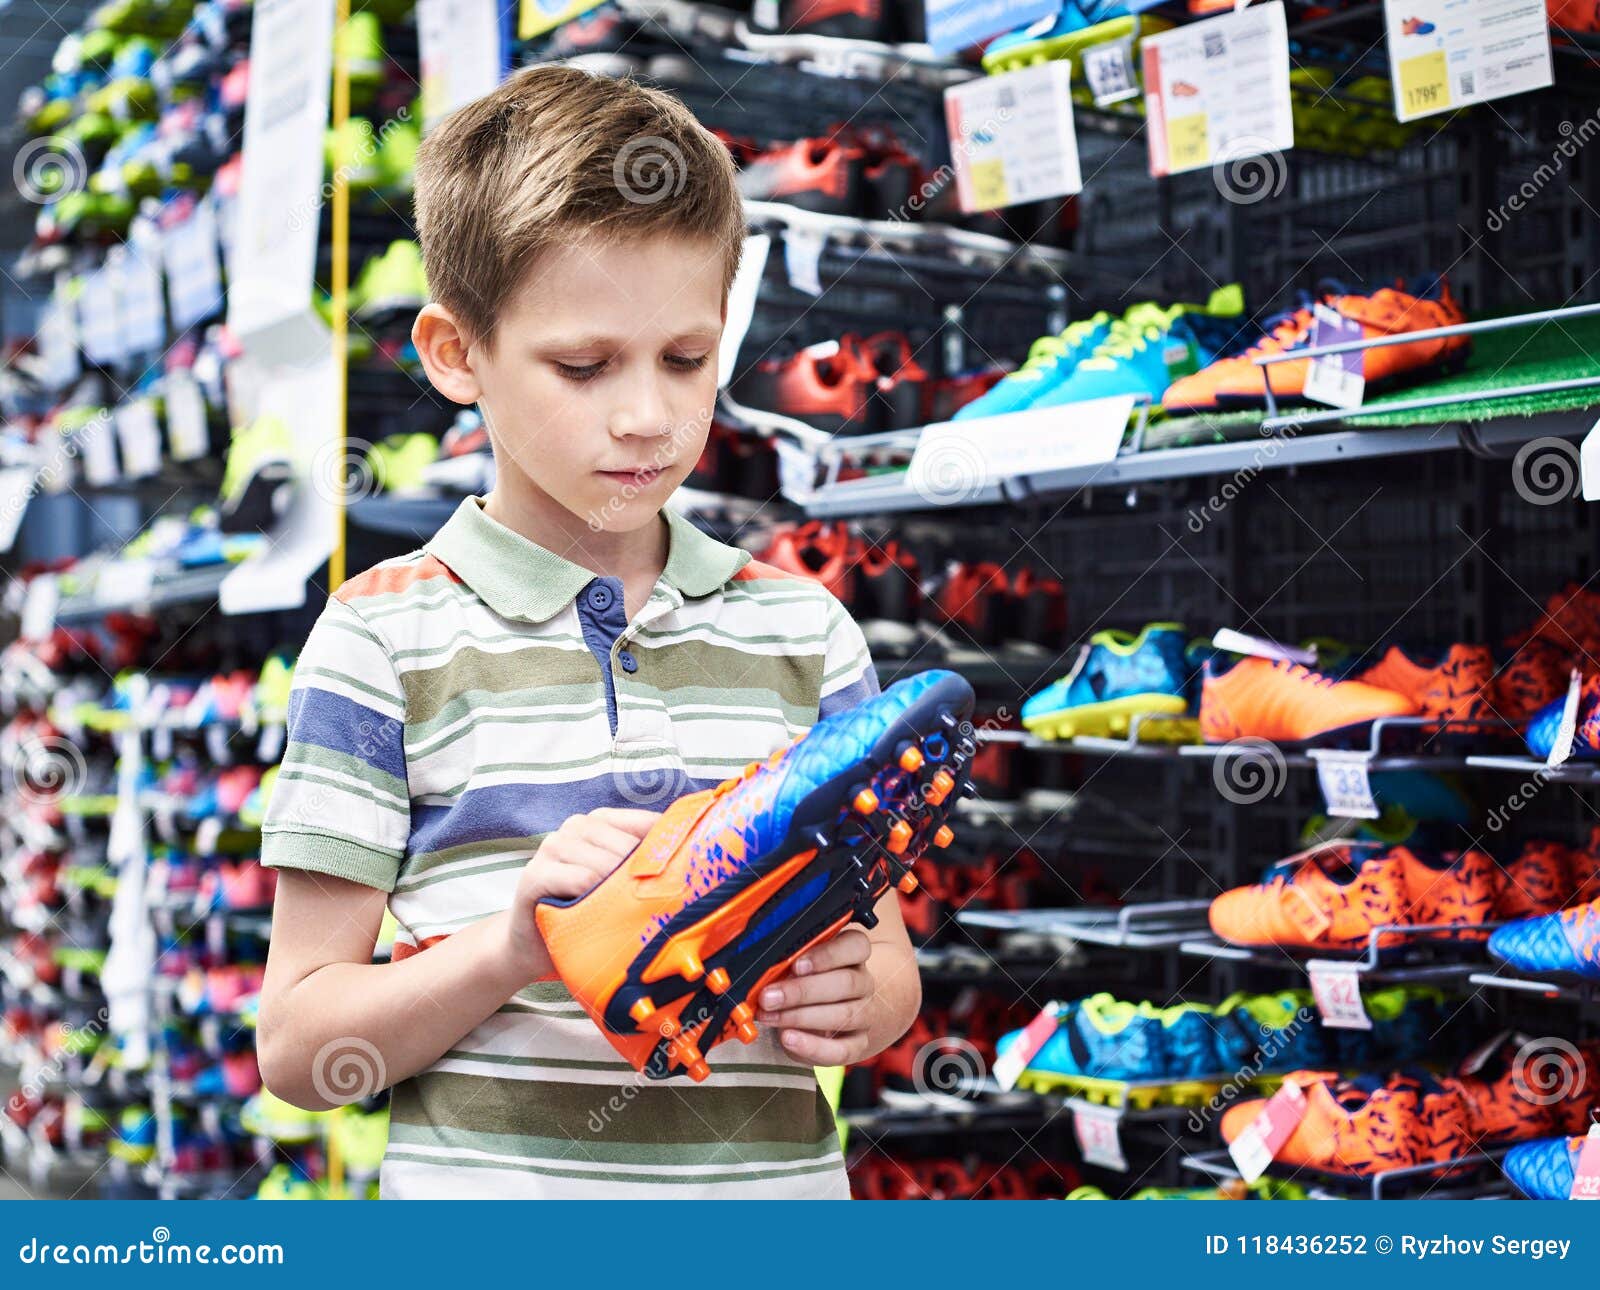 Boy With Football Boots In Sport Store 